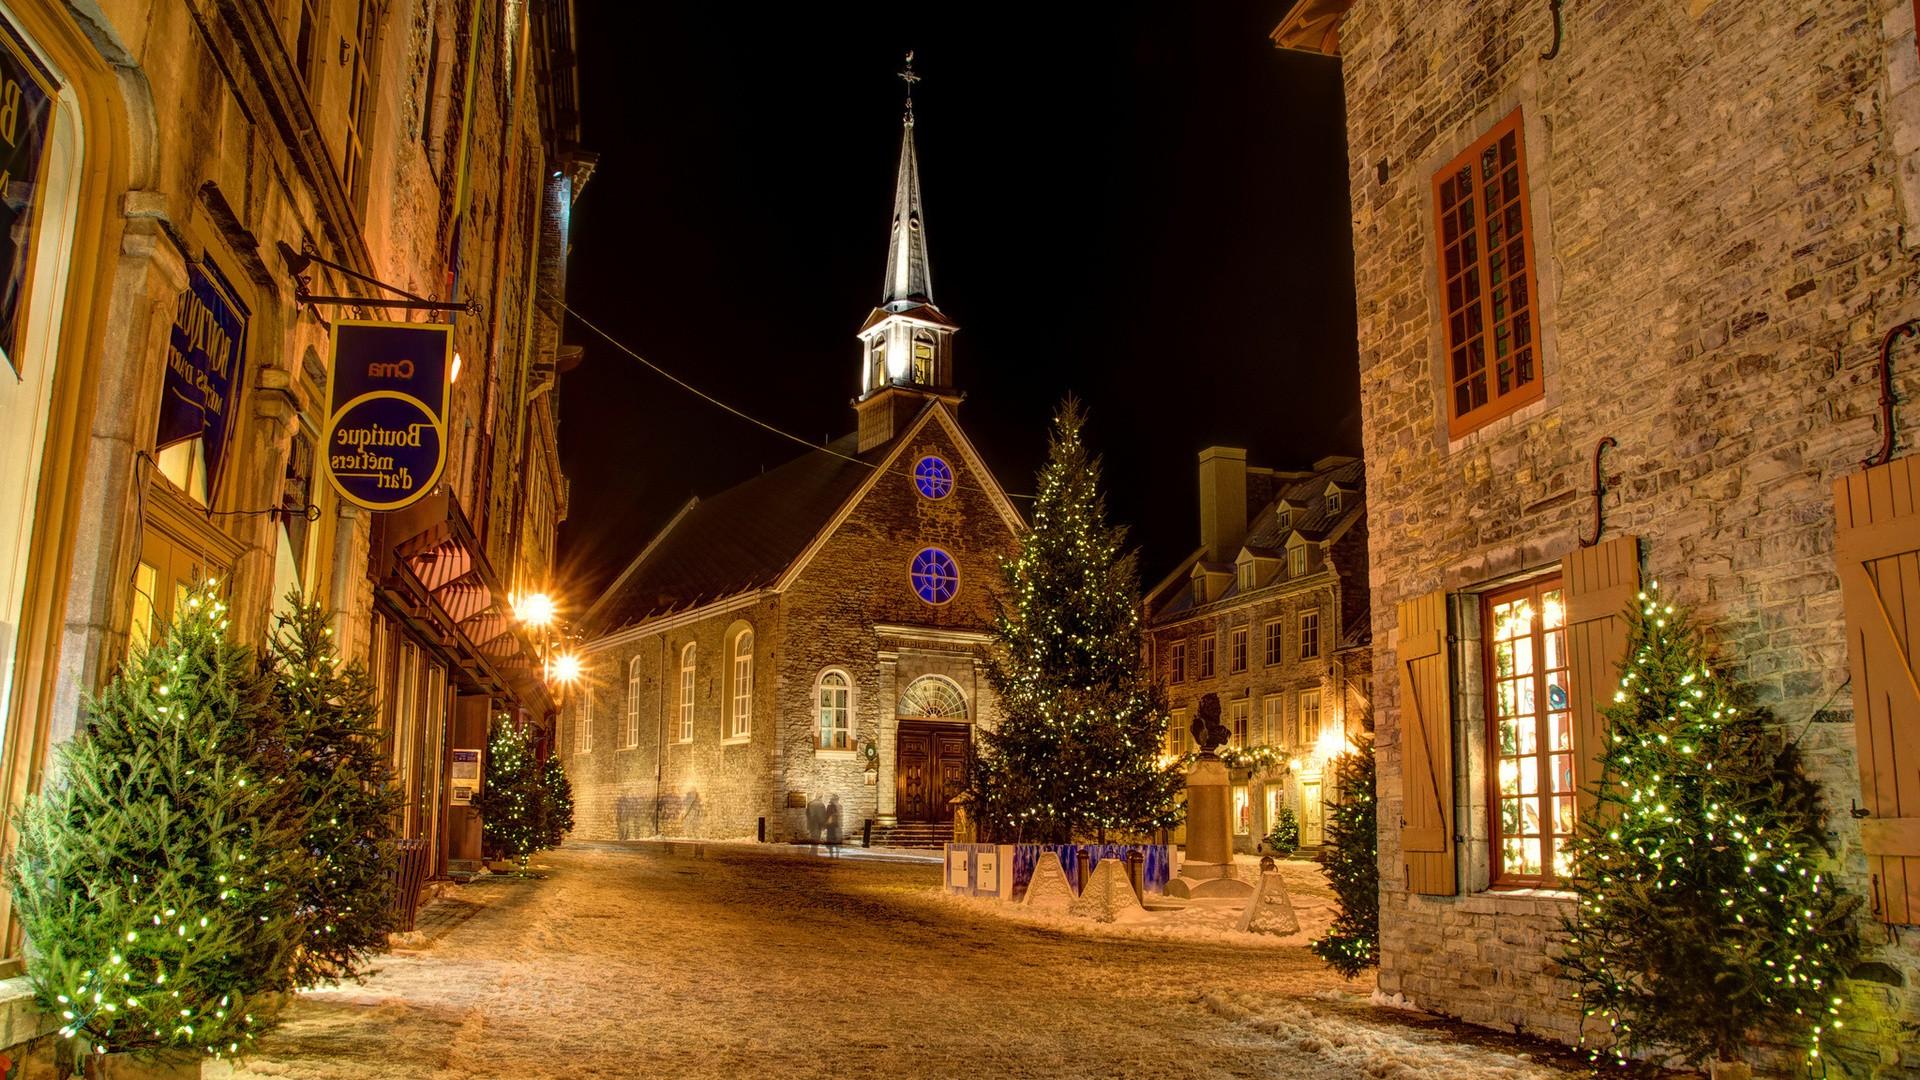 architecture, City, Town, Building, Old Building, History, Tower, Street, Window, House, Quebec, Canada, Christmas, Trees, Lights, Christmas Tree, Christmas Lights, Winter, Church, Christianity, Long Exposure, Night, Snow Wallpaper HD / Desktop and